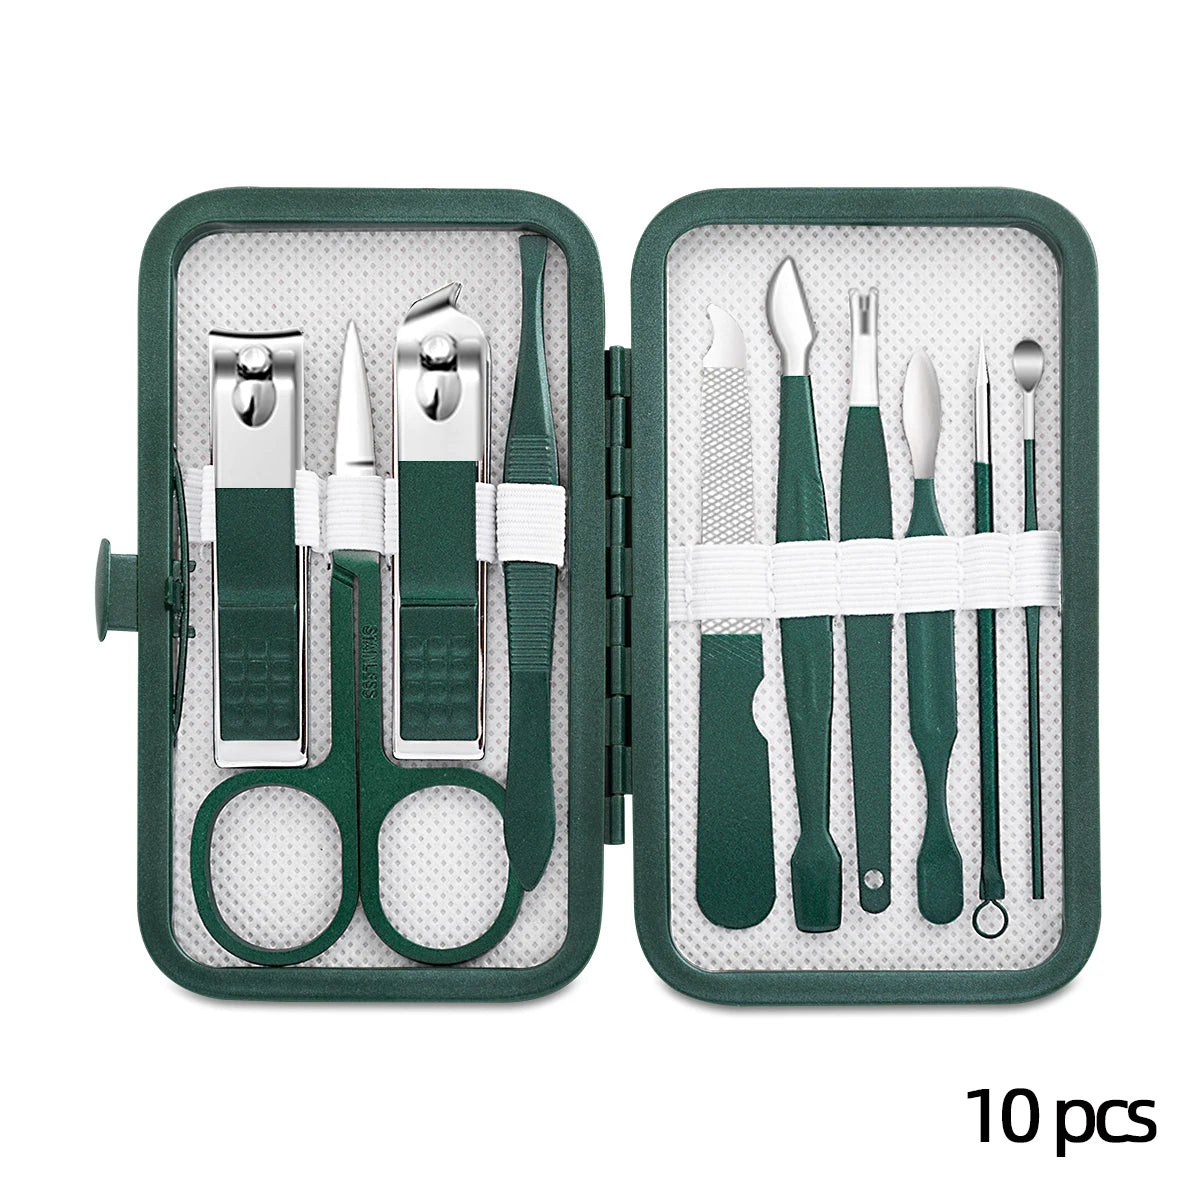 18 Stainless Steel Nail Clipper Set: Portable Manicure Grooming Tools